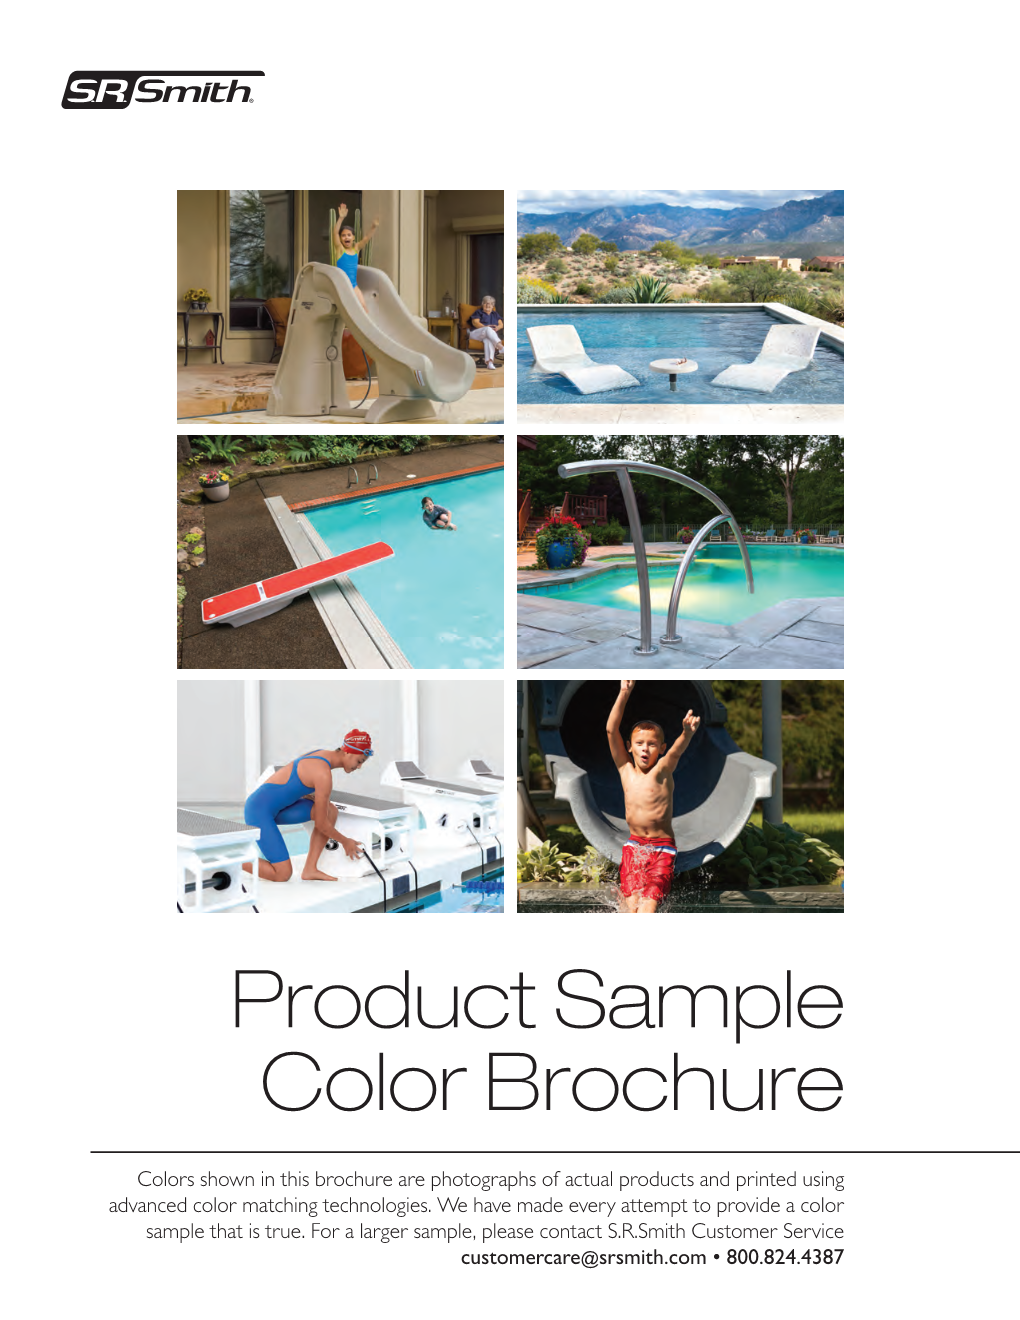 Product Sample Color Brochure